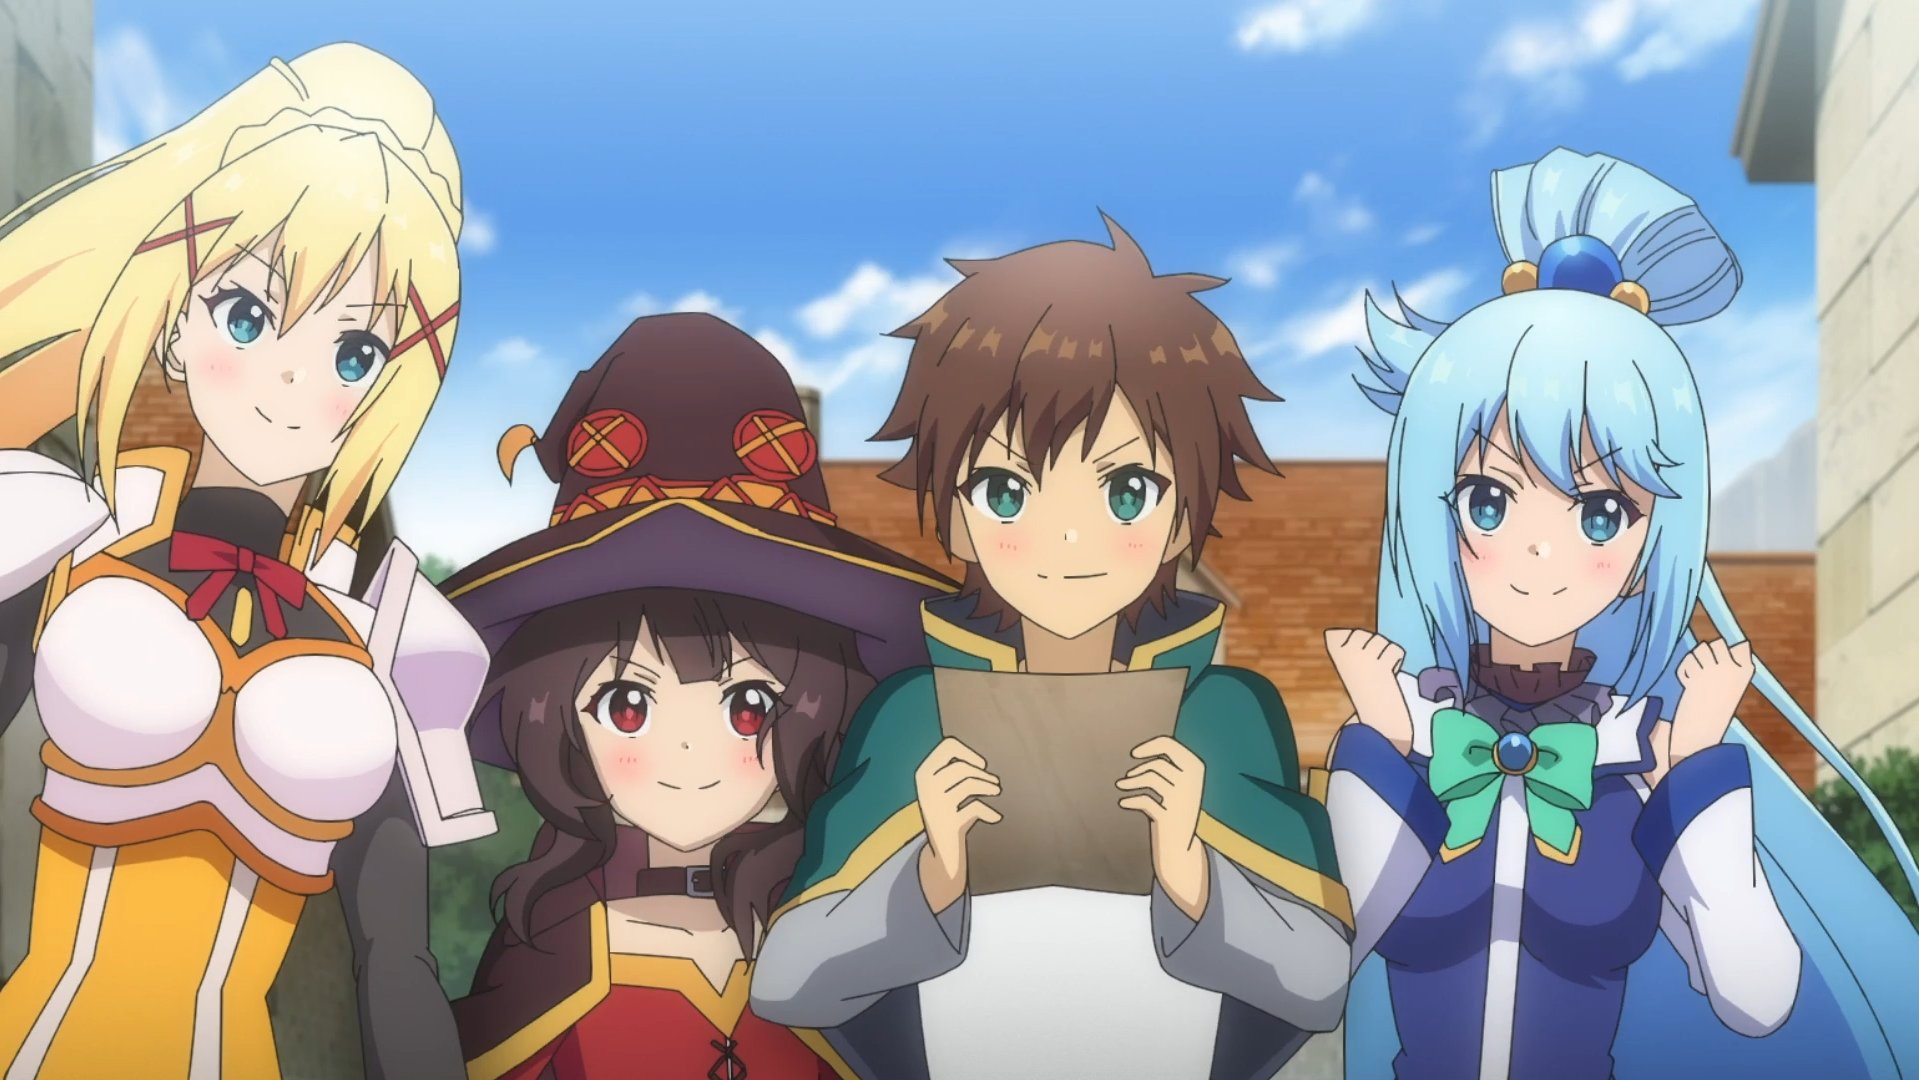 KonoSuba: Fantastic Days on X: Happy New Year from Kazuma and his party!  🥳 Are you ready to embark on an adventure with the legendary party of  Kazuma, Aqua, Megumin and Darkness?!